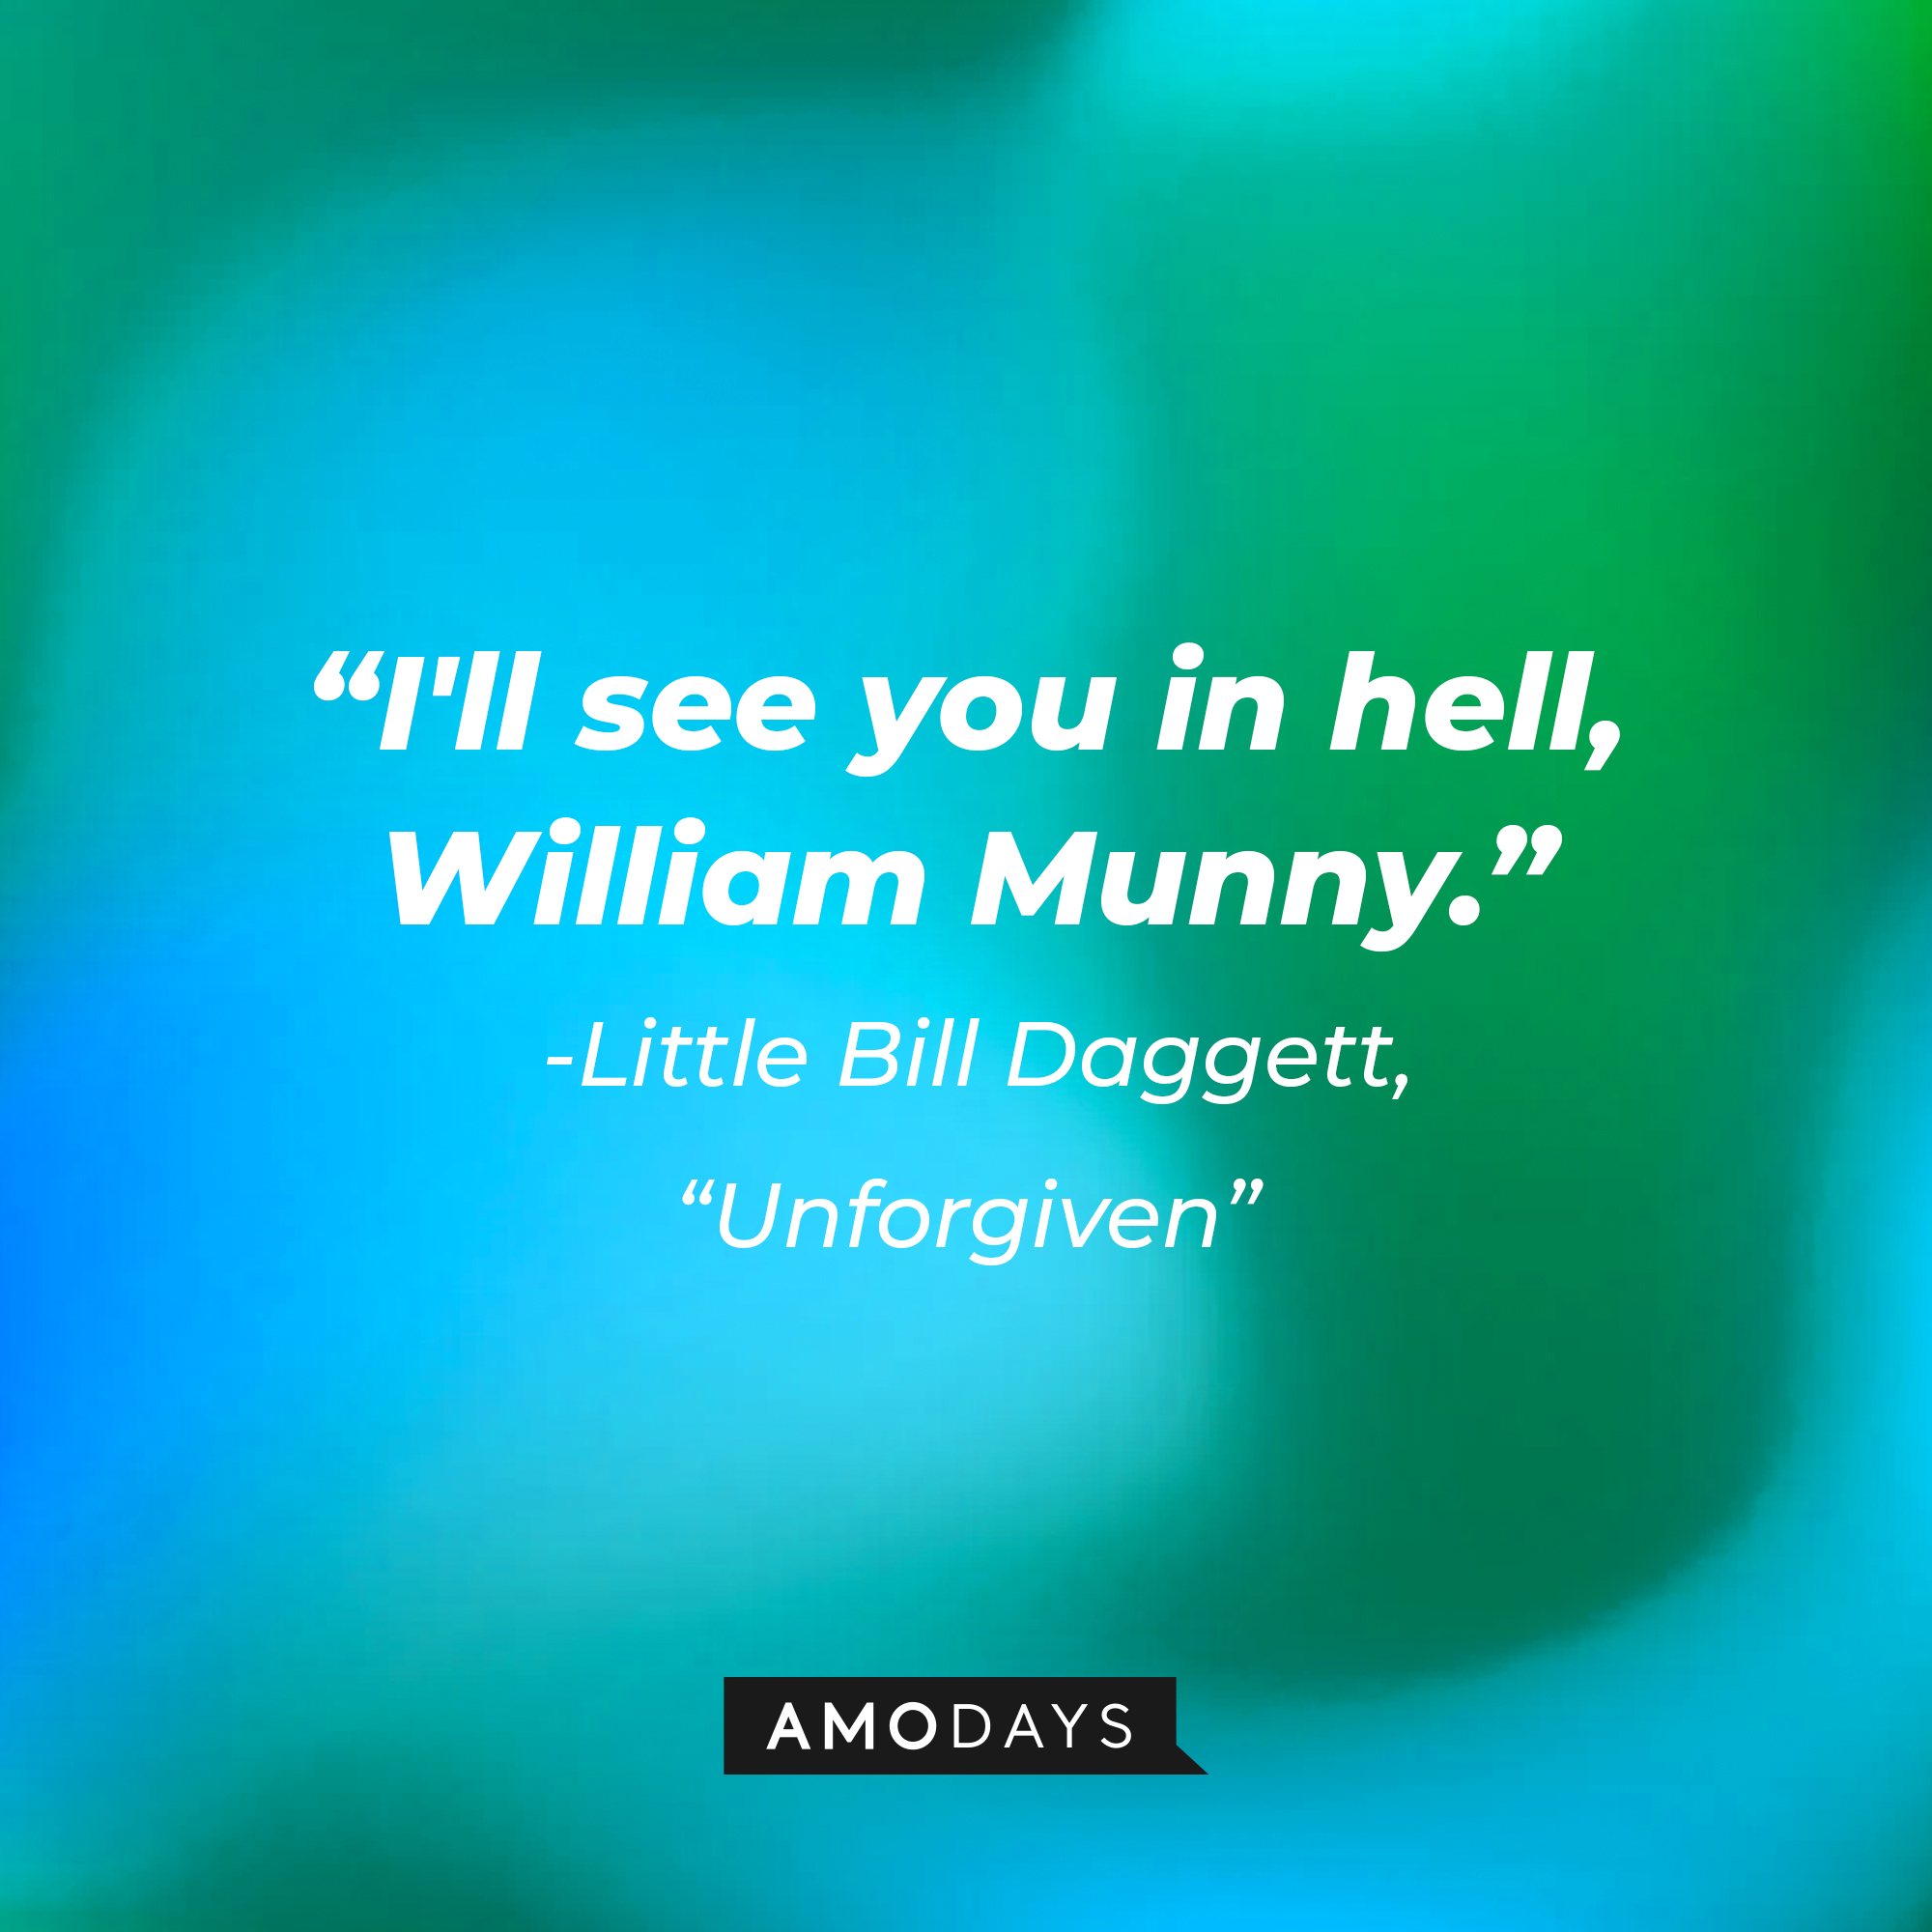 Little Bill Dagget's quote in "Unforgiven:" "I'll see you in hell, William Munny."  | Source: AmoDays